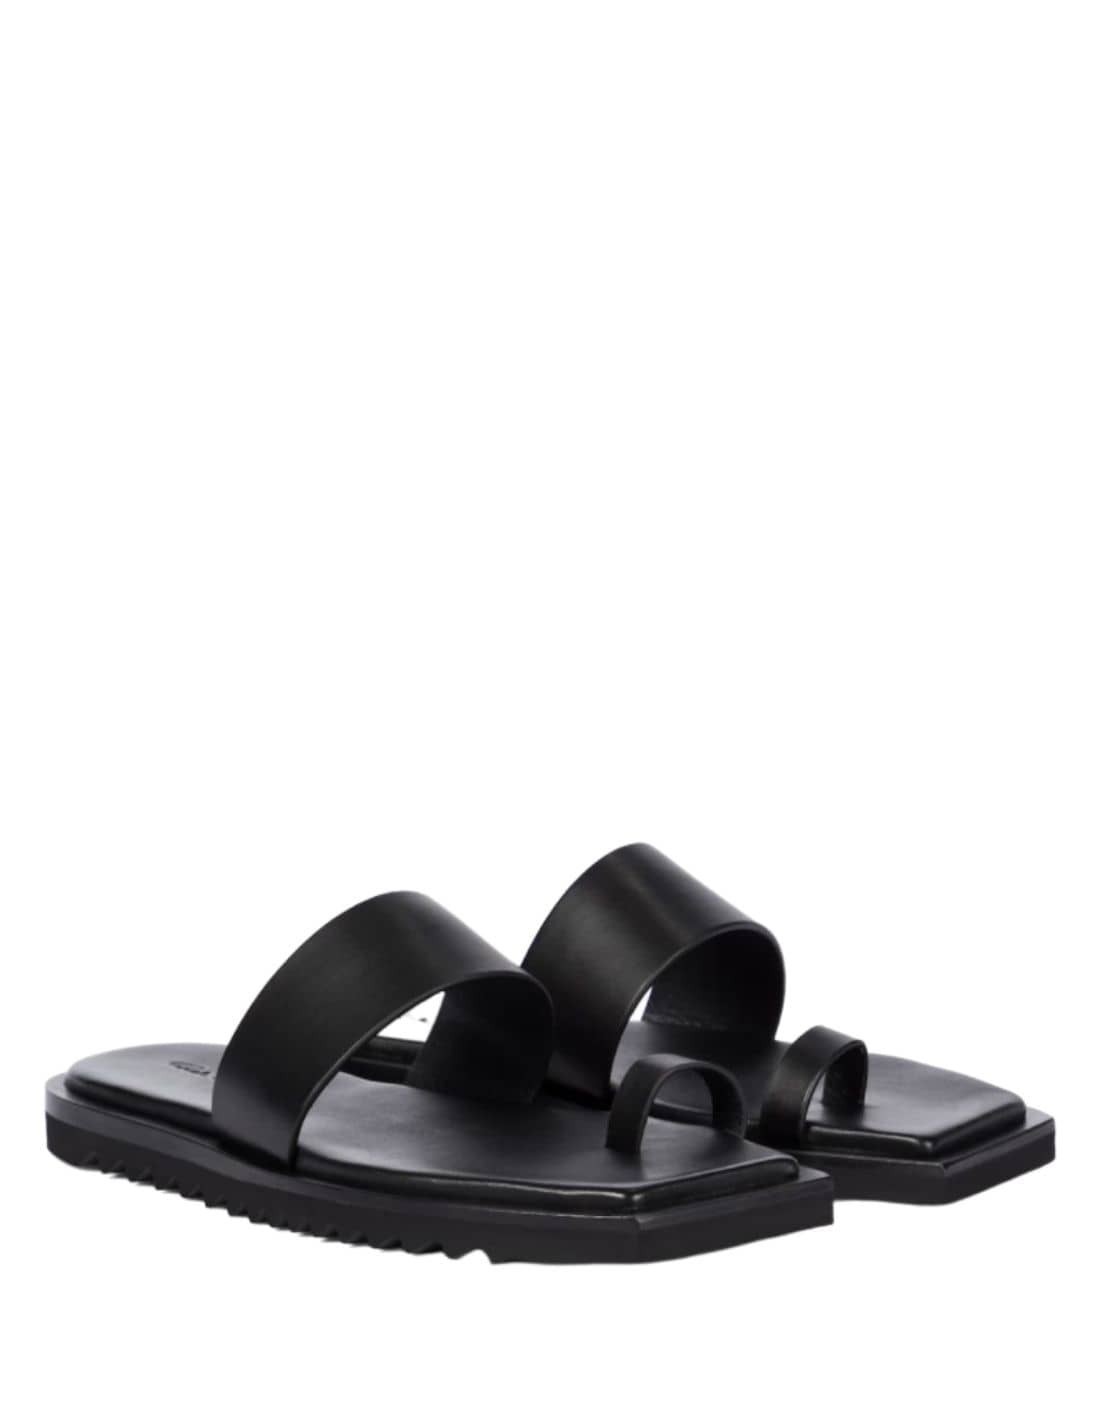 RICK OWENS black sandals with notched sole for women - SS21